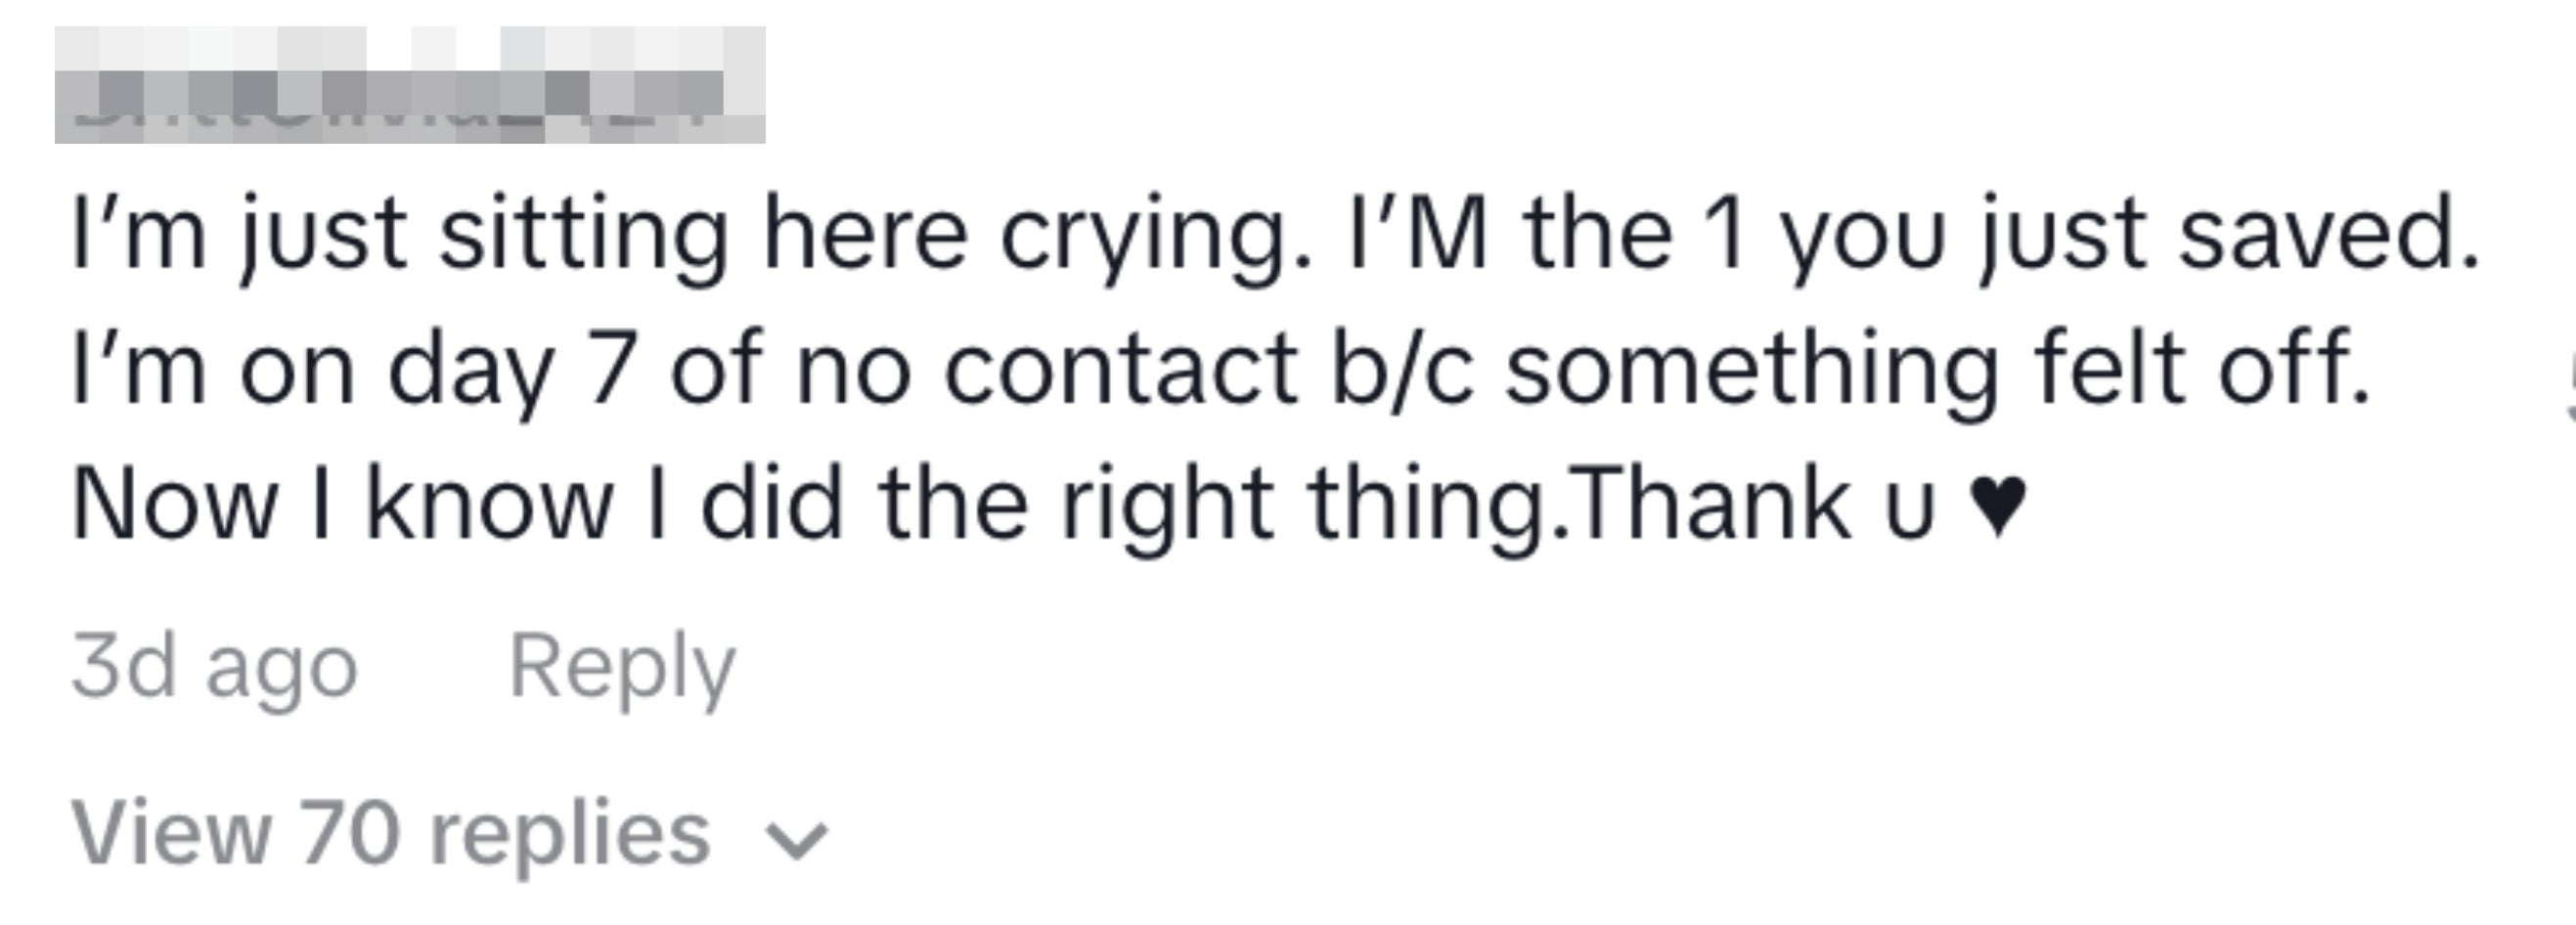 A screenshot of a social media comment thanking someone for help, expressing relief on making a right decision